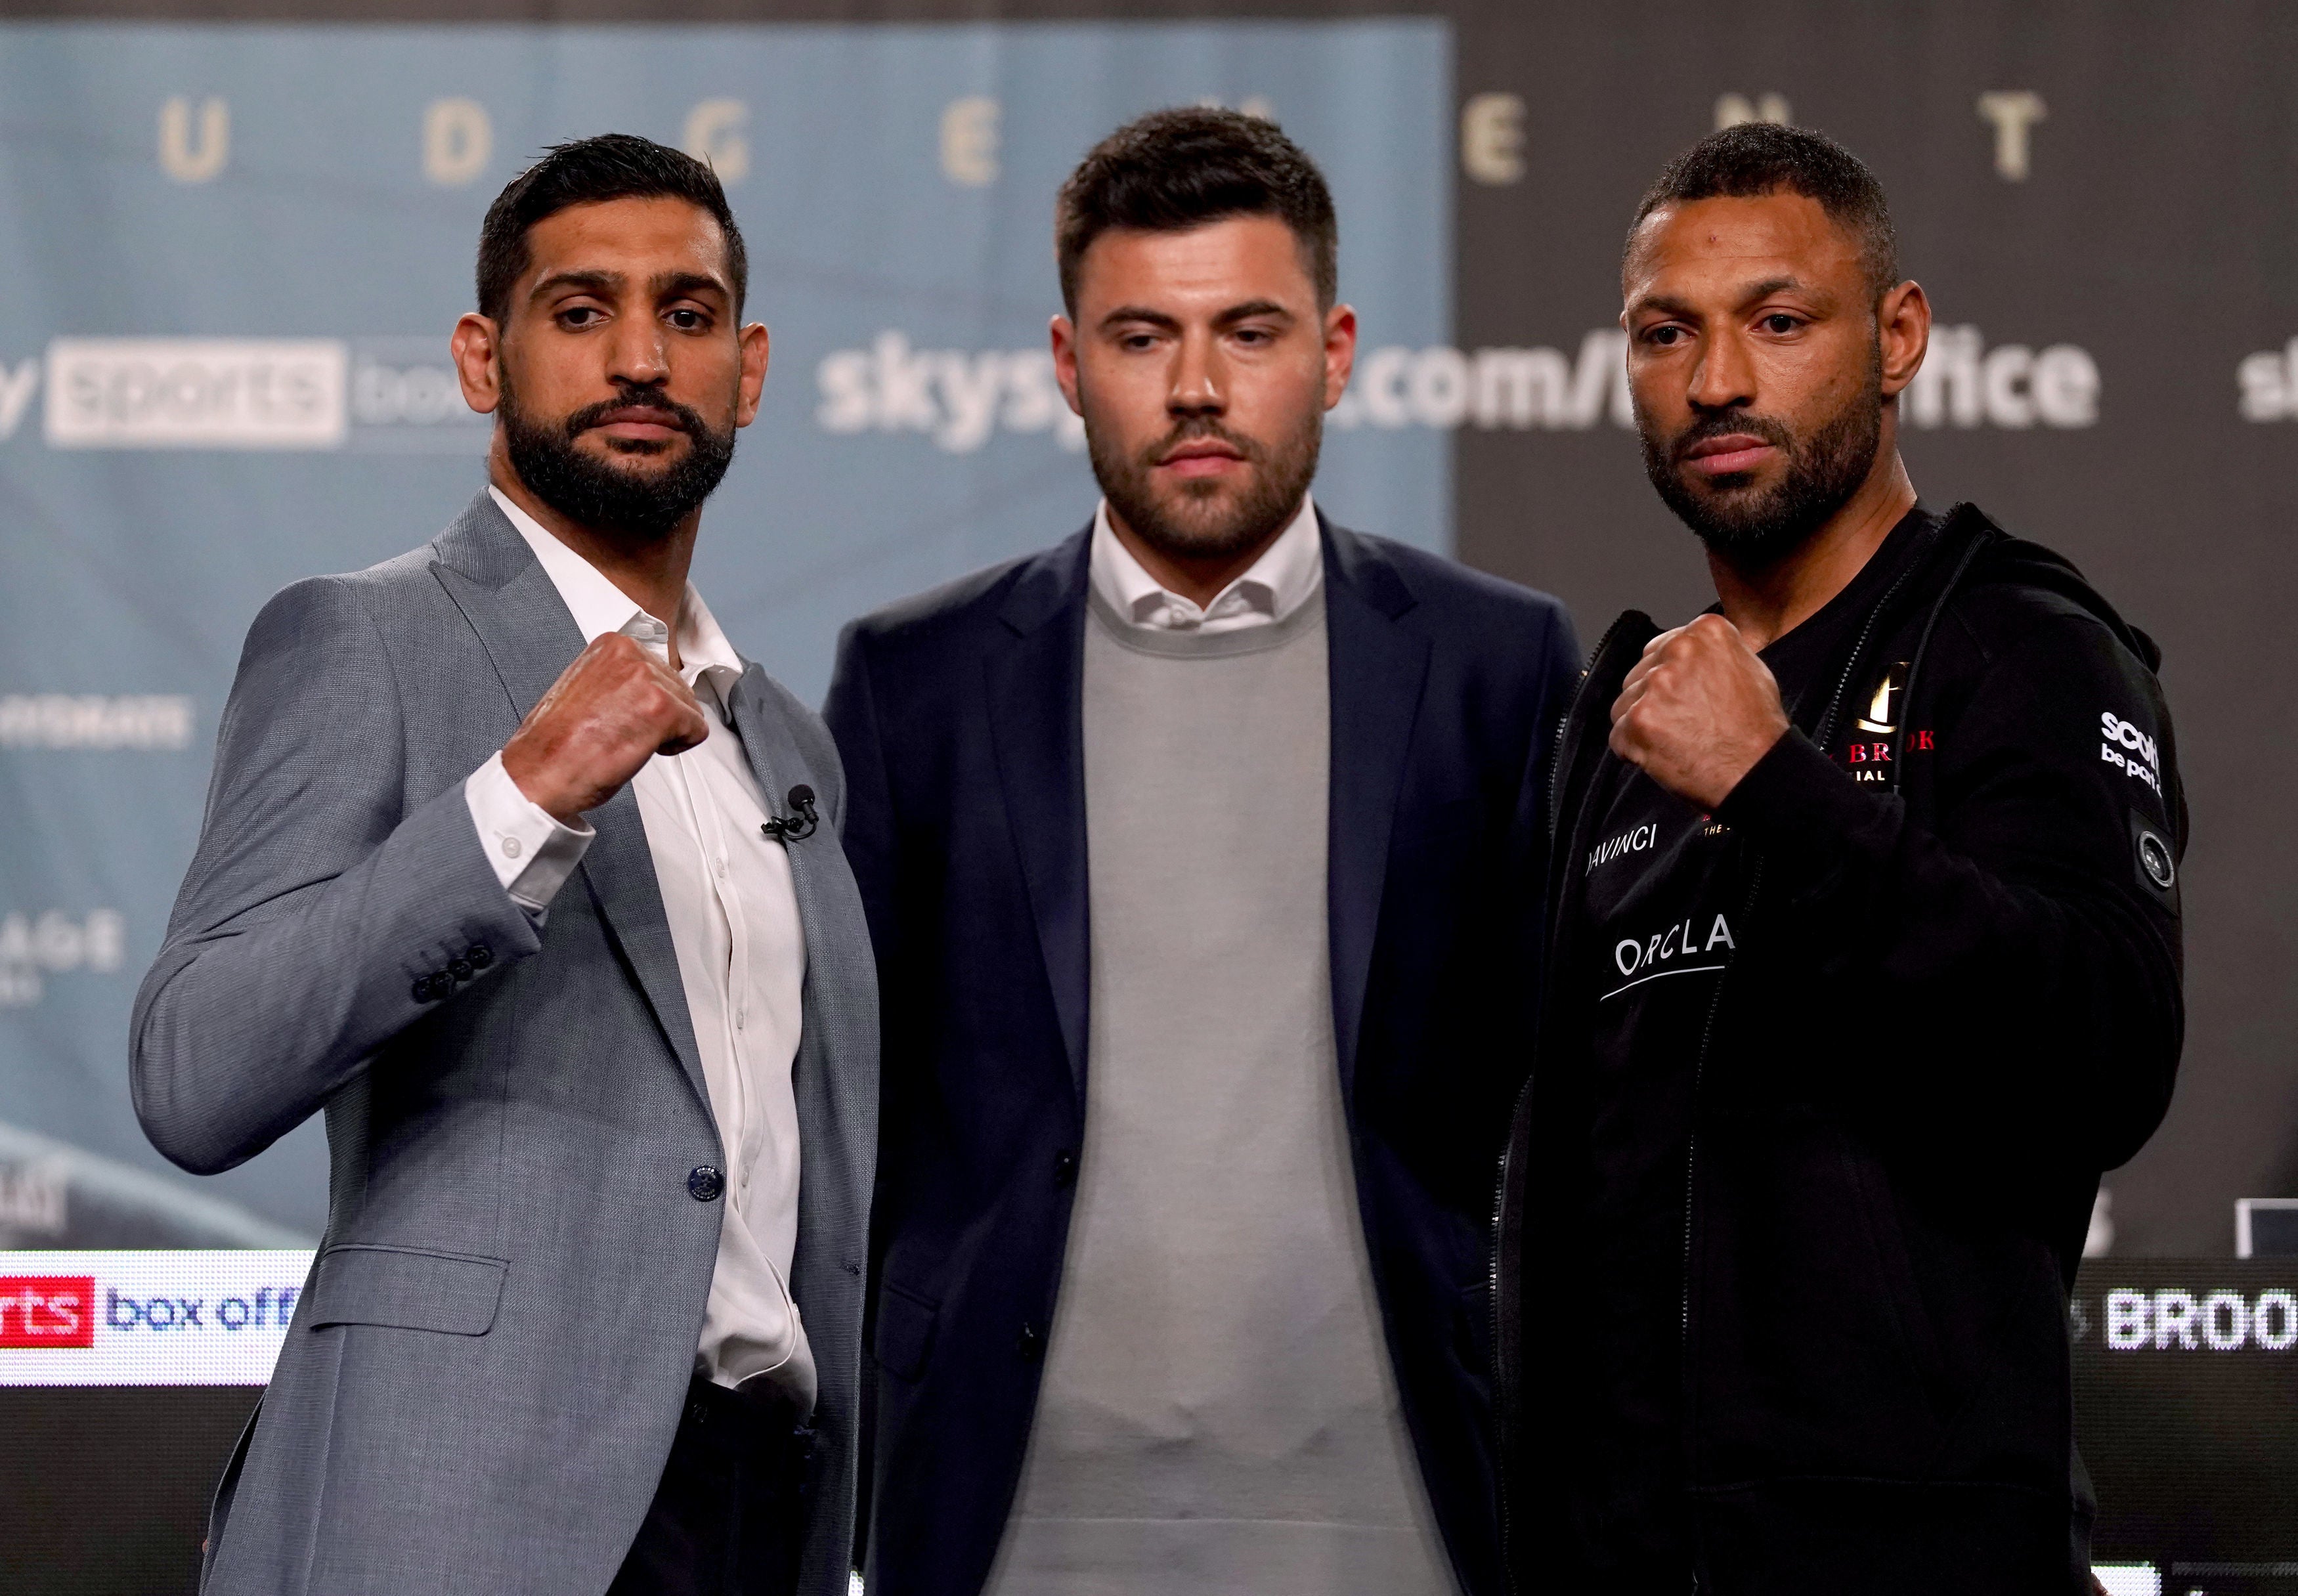 Amir Khan (left) and Kell Brook met at their pre-fight press conference